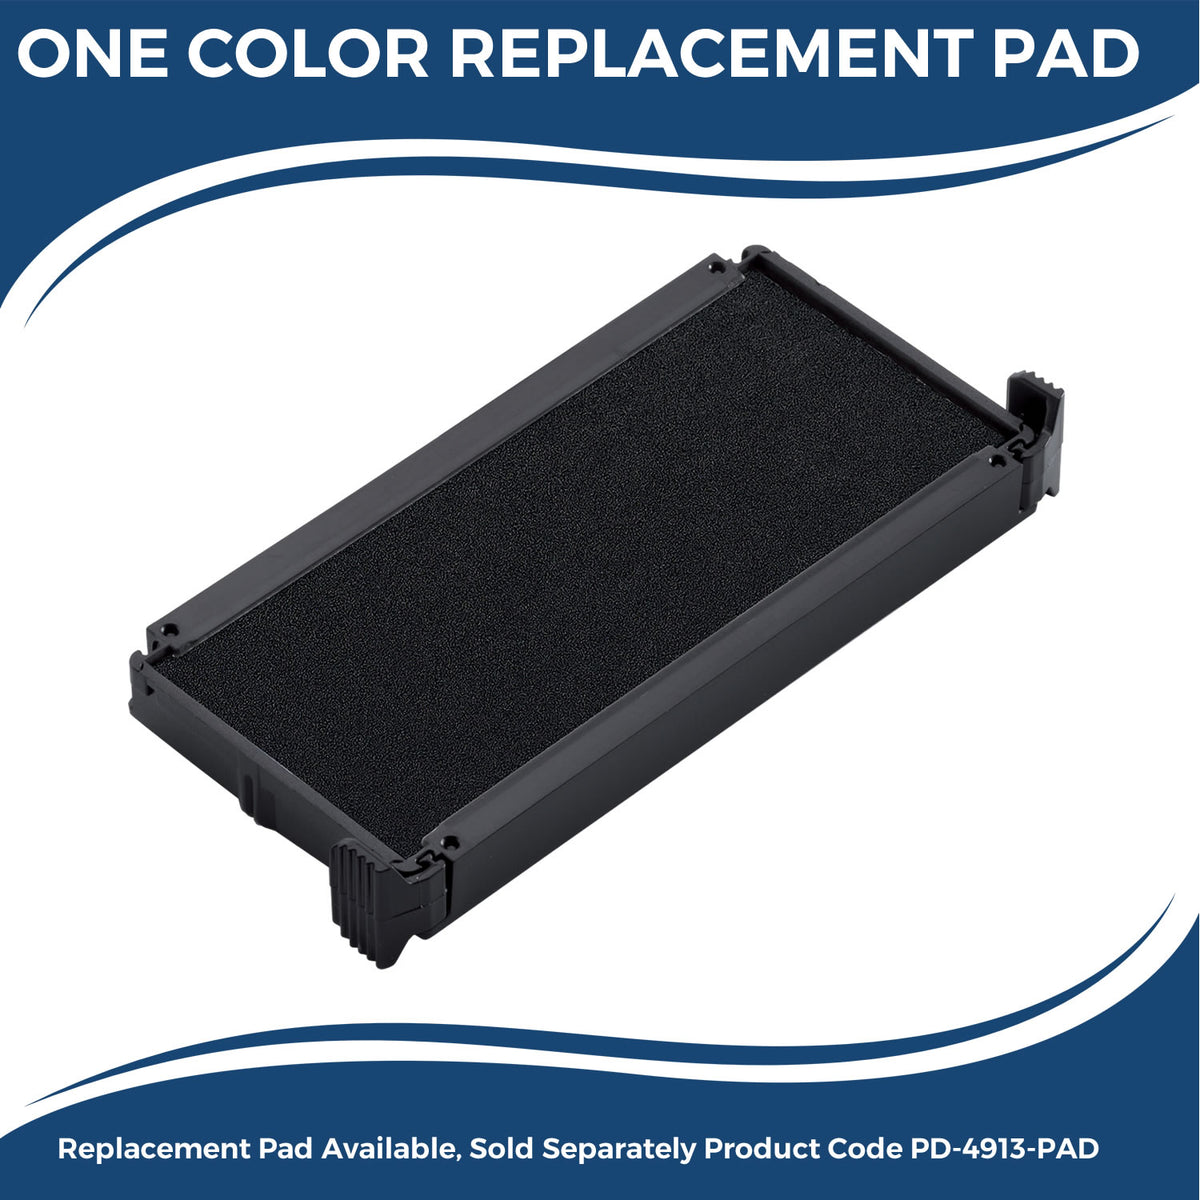 Large Self Inking Outstanding Stamp 4700S Large Replacment Pad